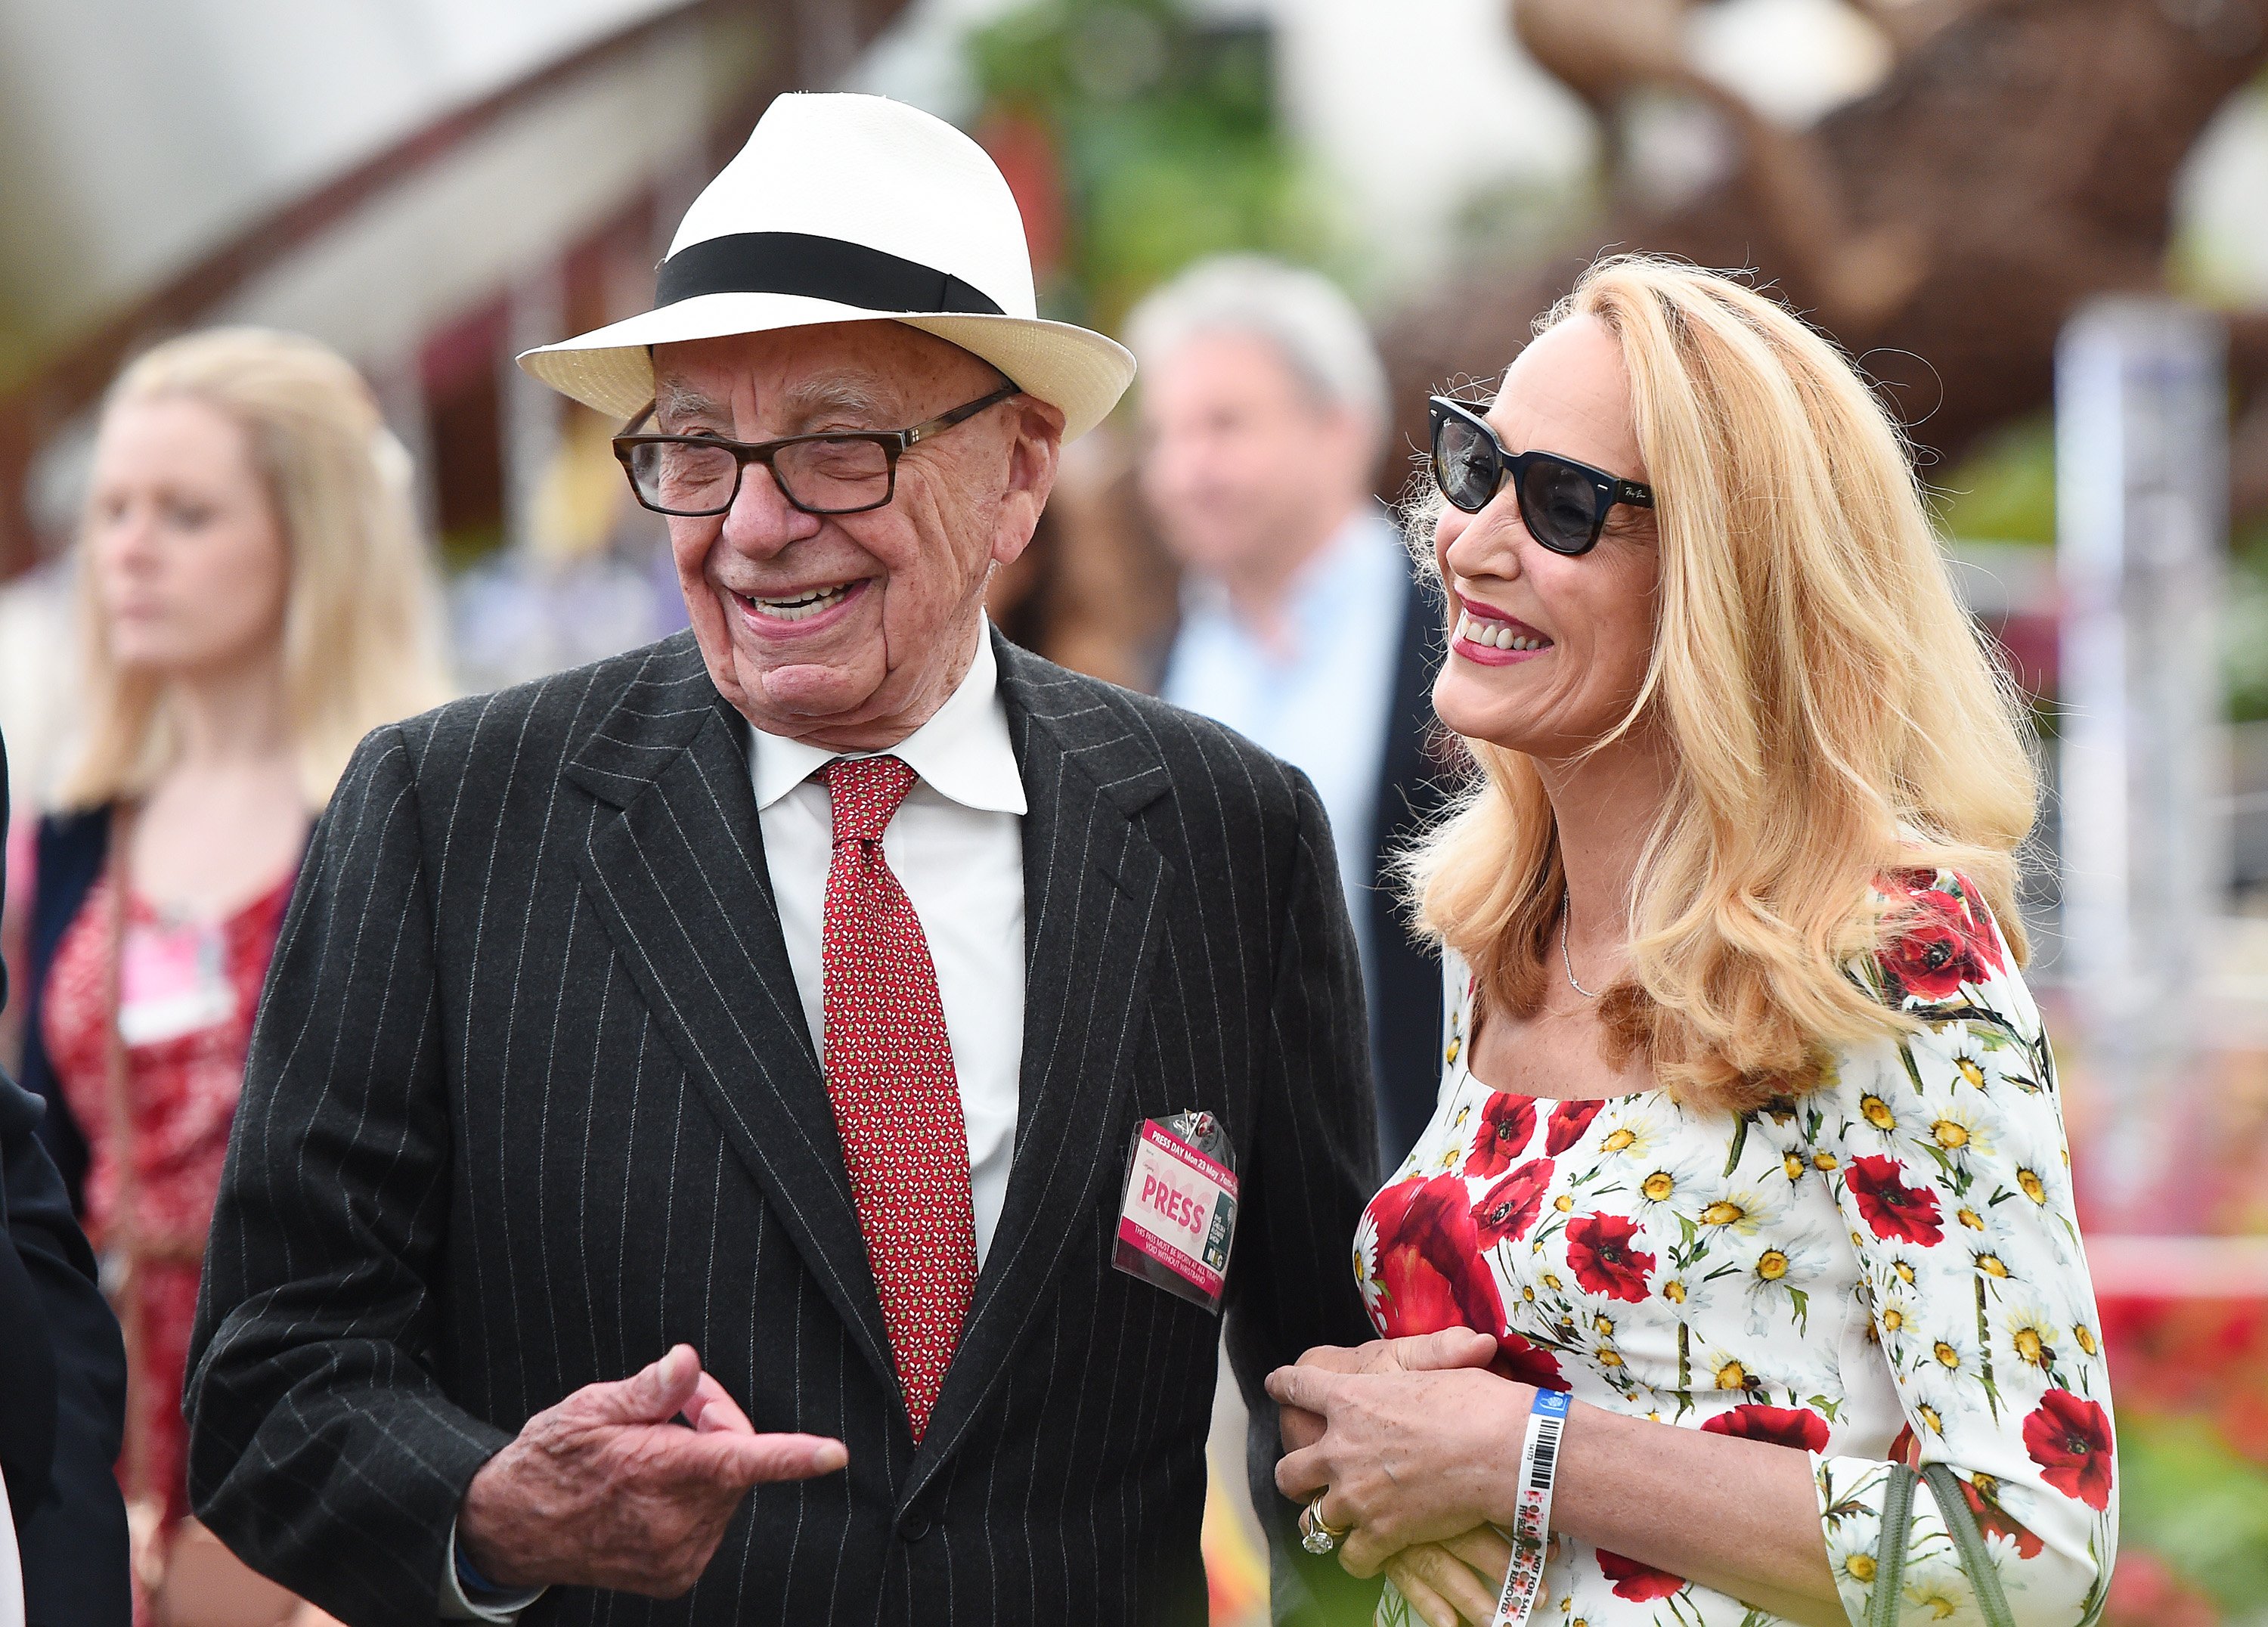 Rupert Murdoch and Jerry Hall attend the Chelsea Flower Show press day at Royal Hospital Chelsea on May 23, 2016 in London, England.  |  Source: Getty Images